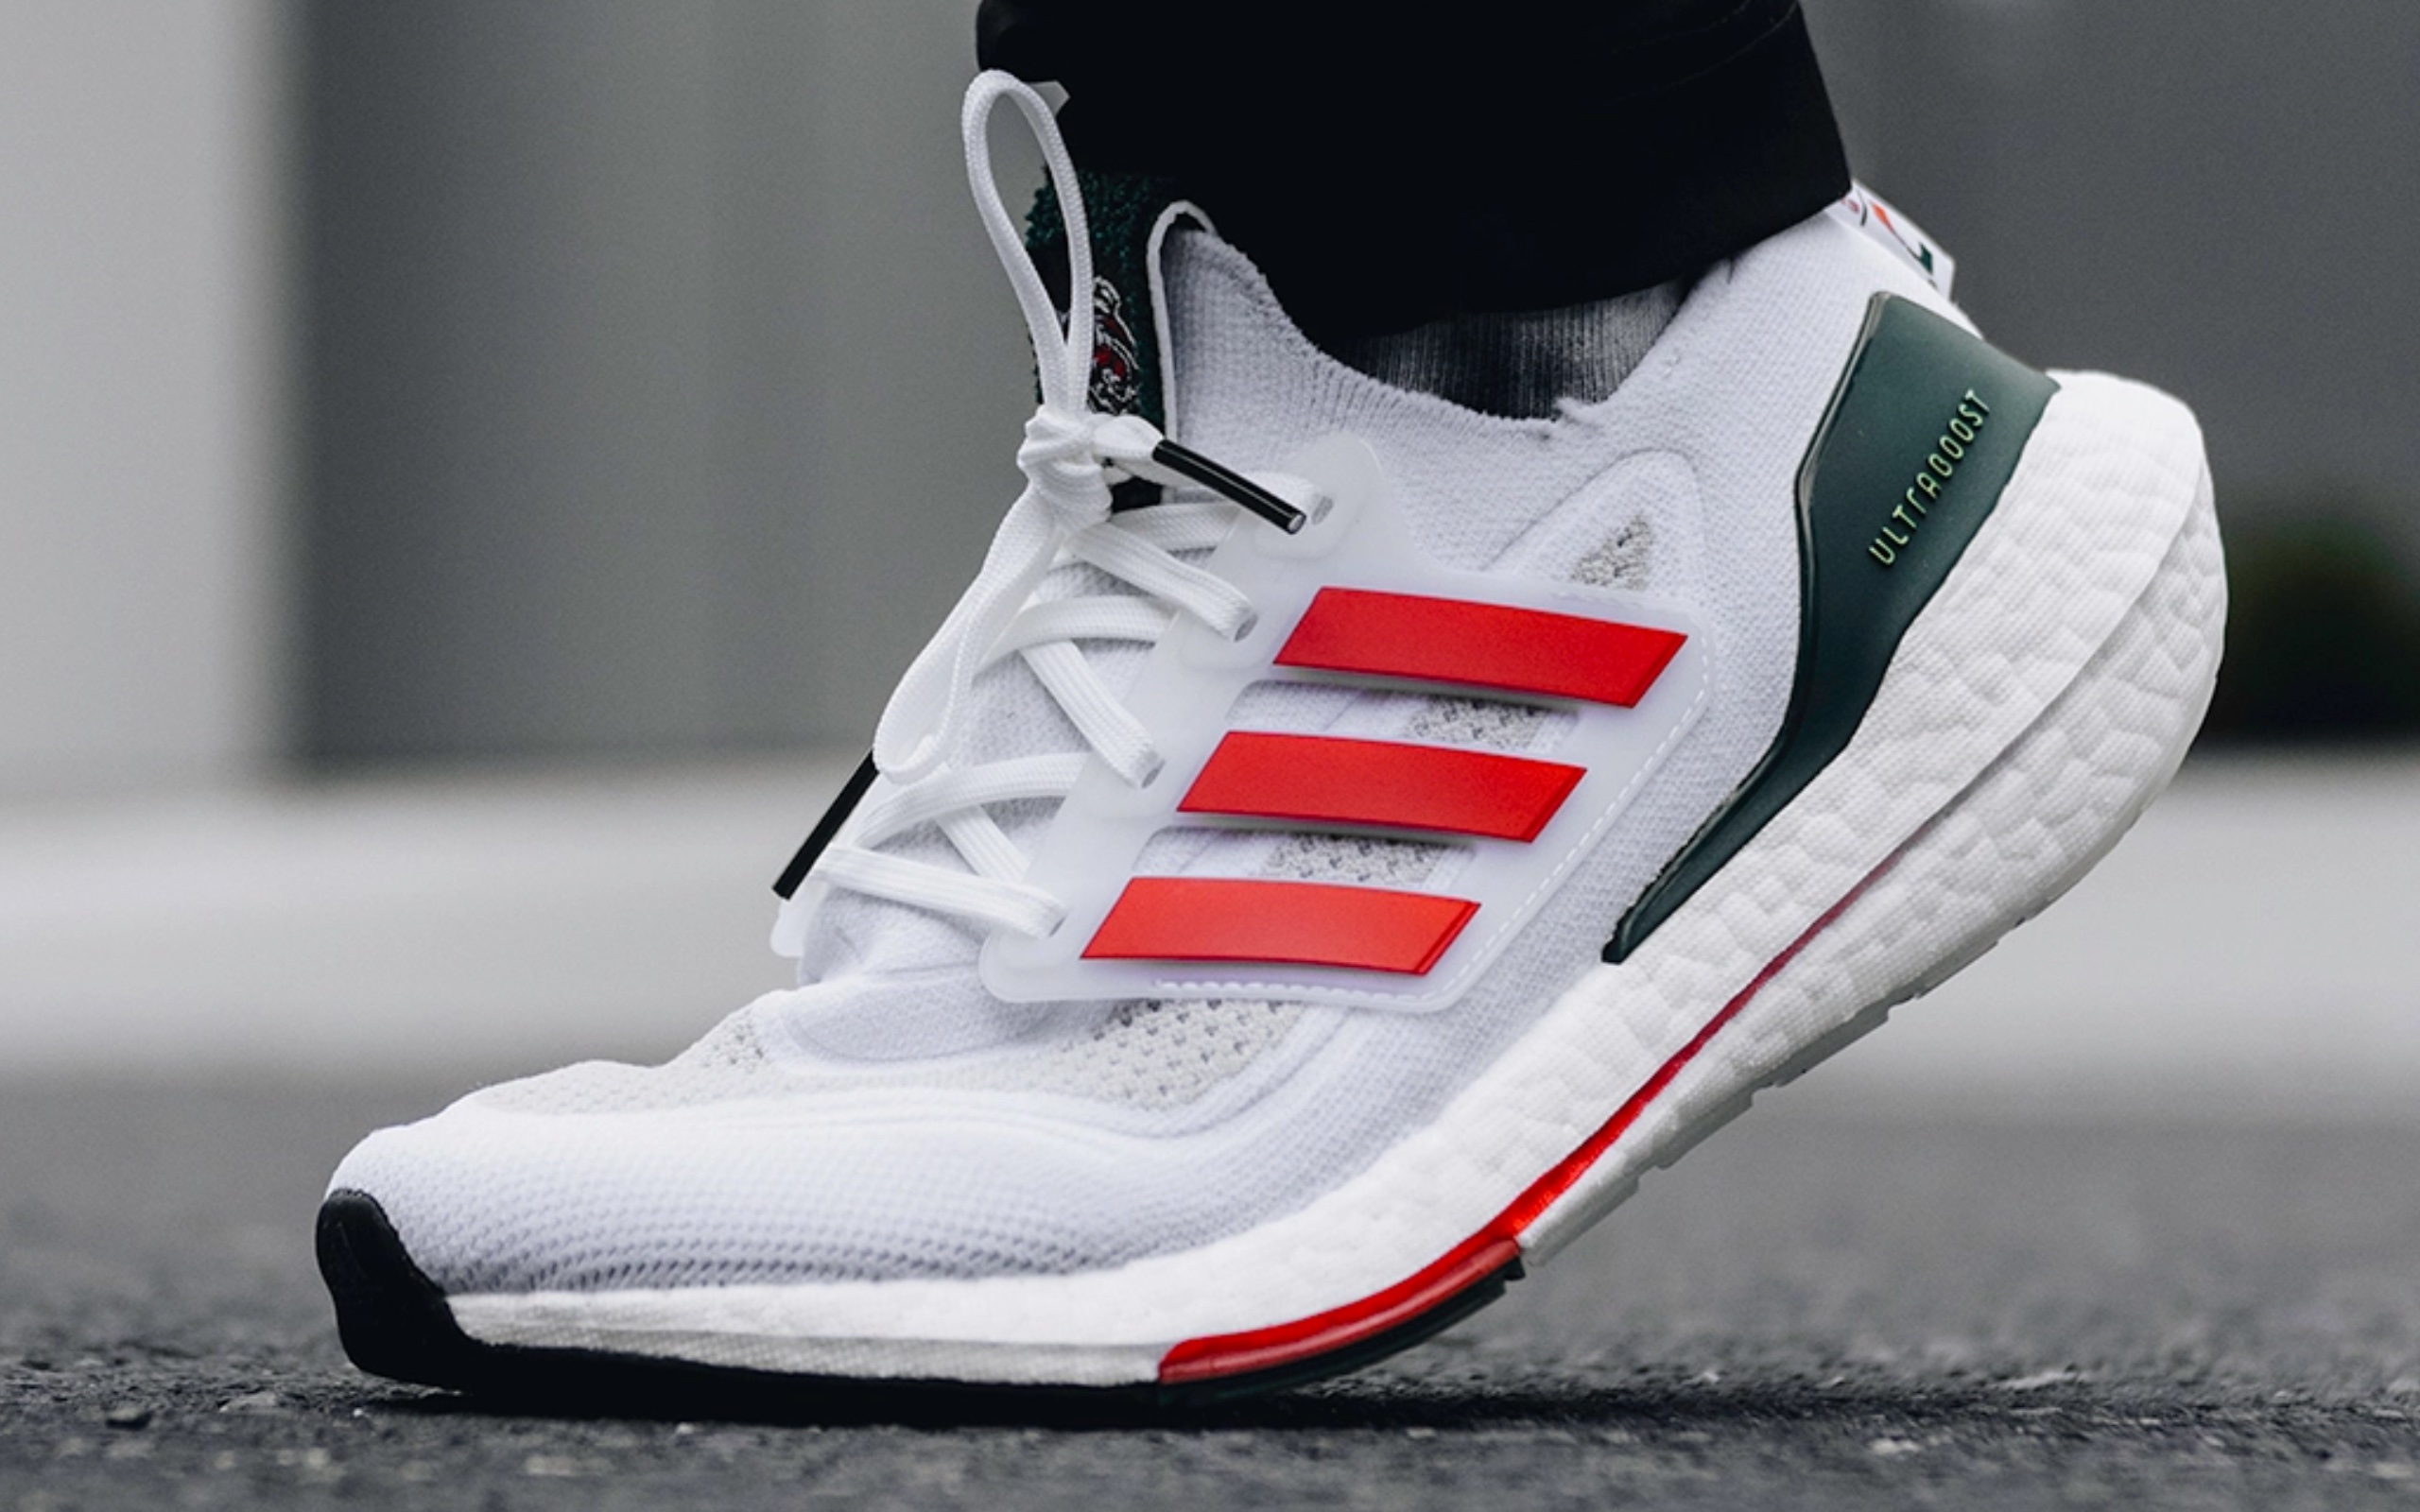 adidas Labor Sale takes 30% sitewide + free UltraBoosts, more